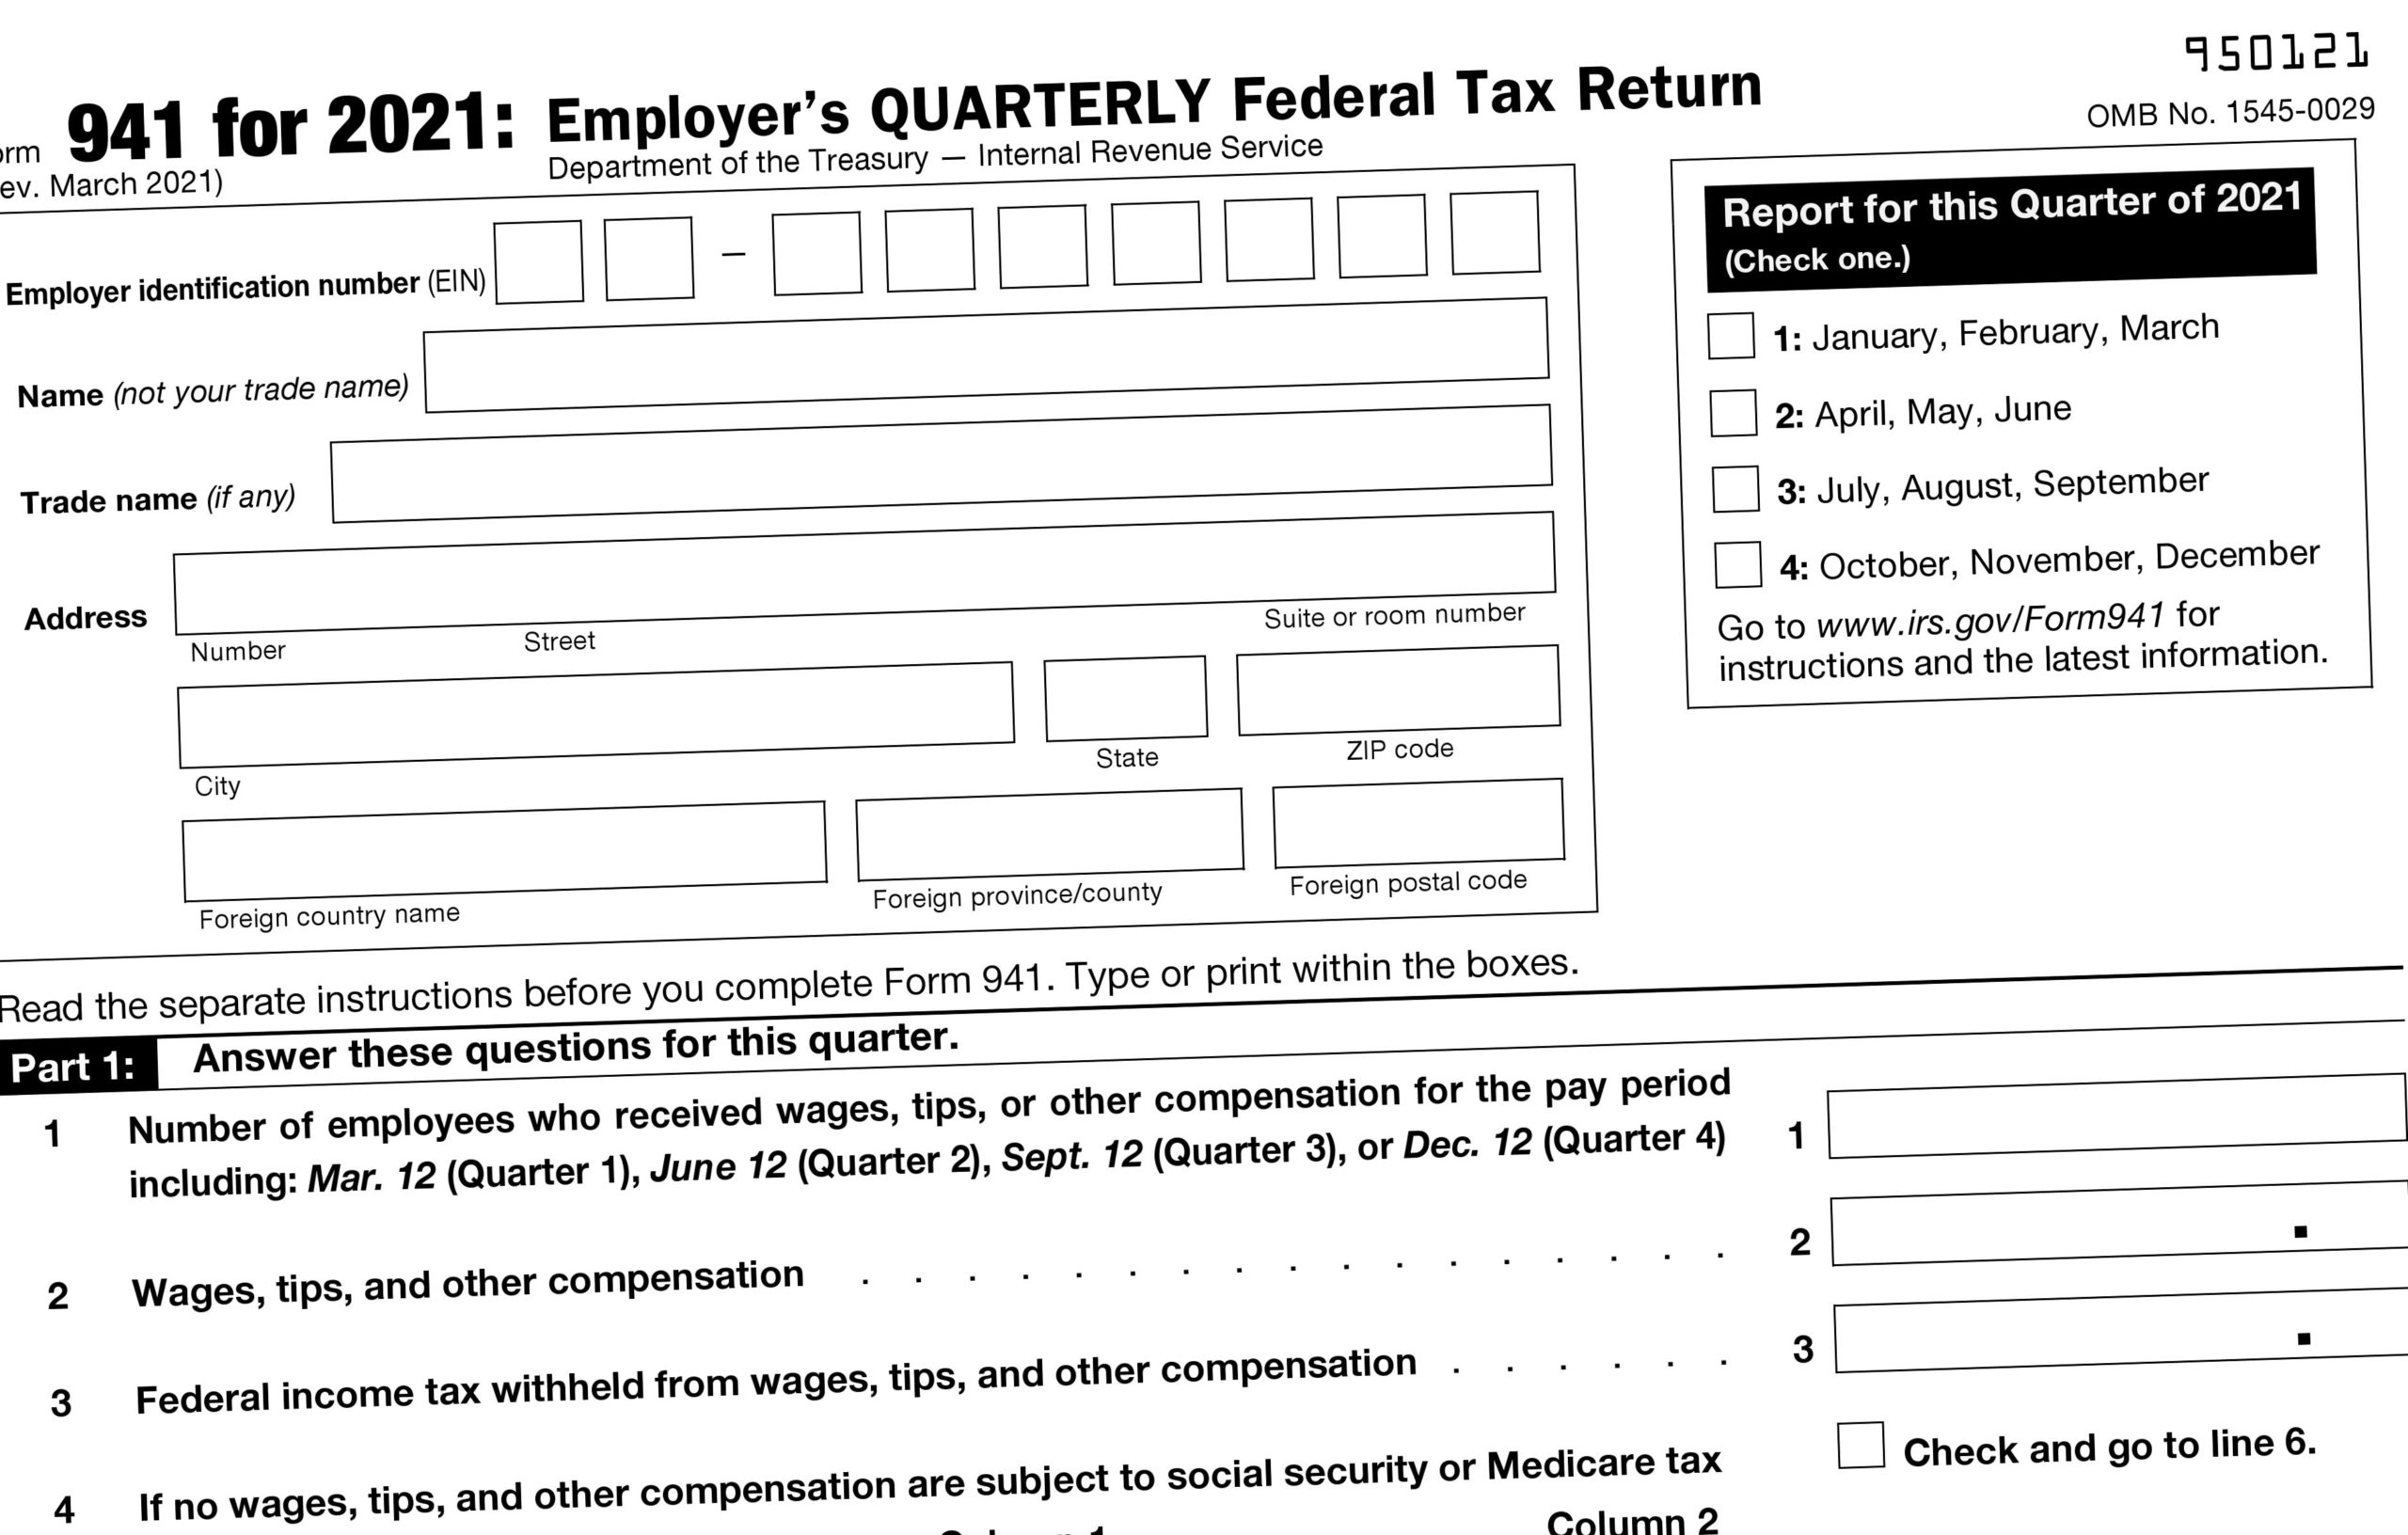 How to Claim the Employee Retention Tax Credit using Form 941-X